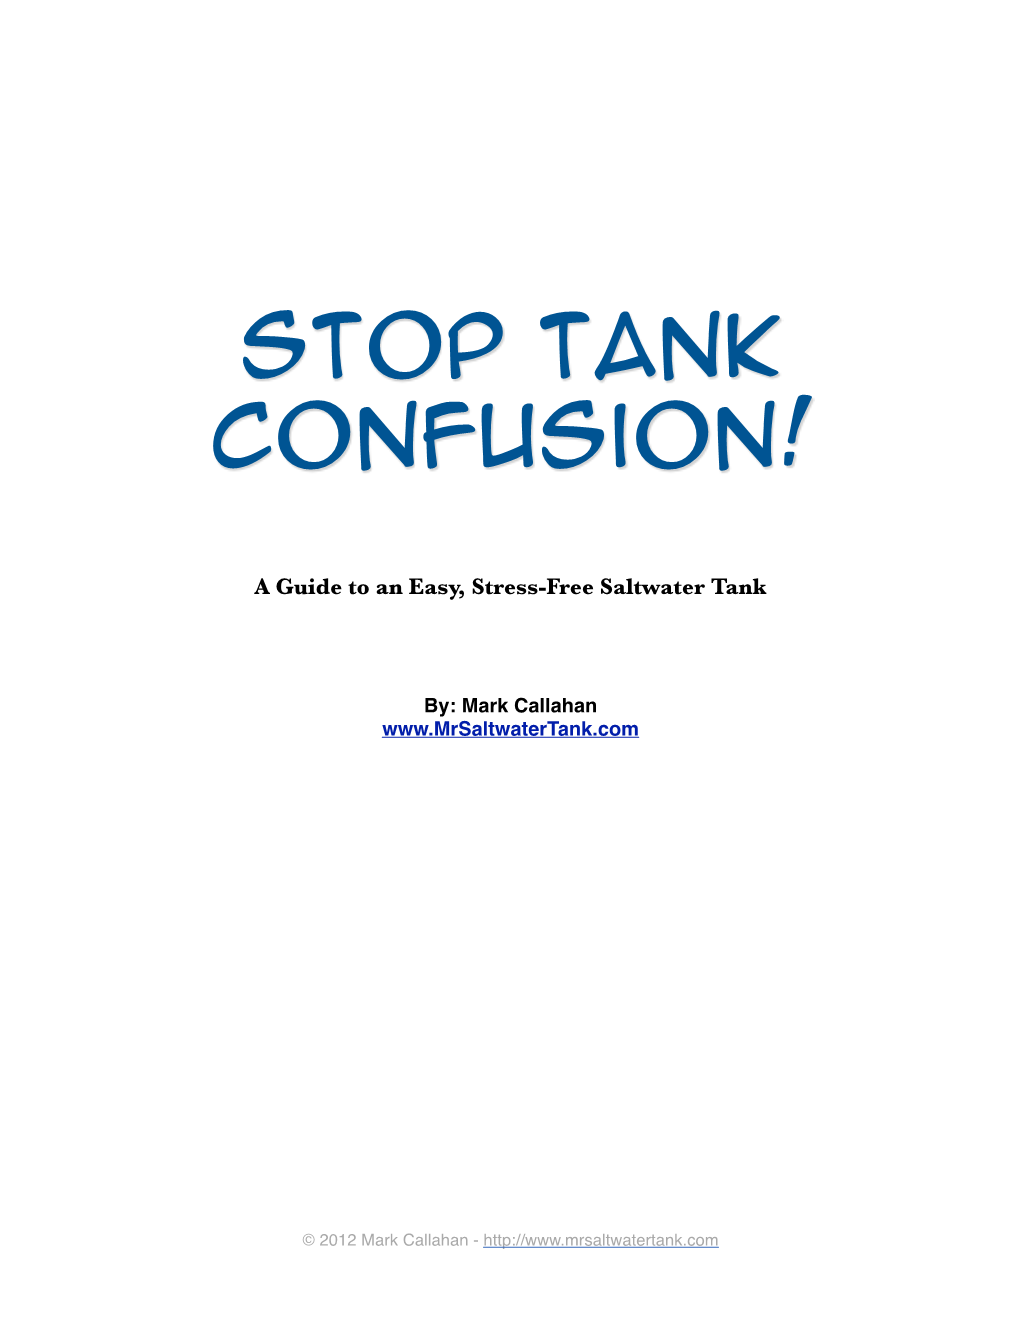 Stop Tank Confusion!